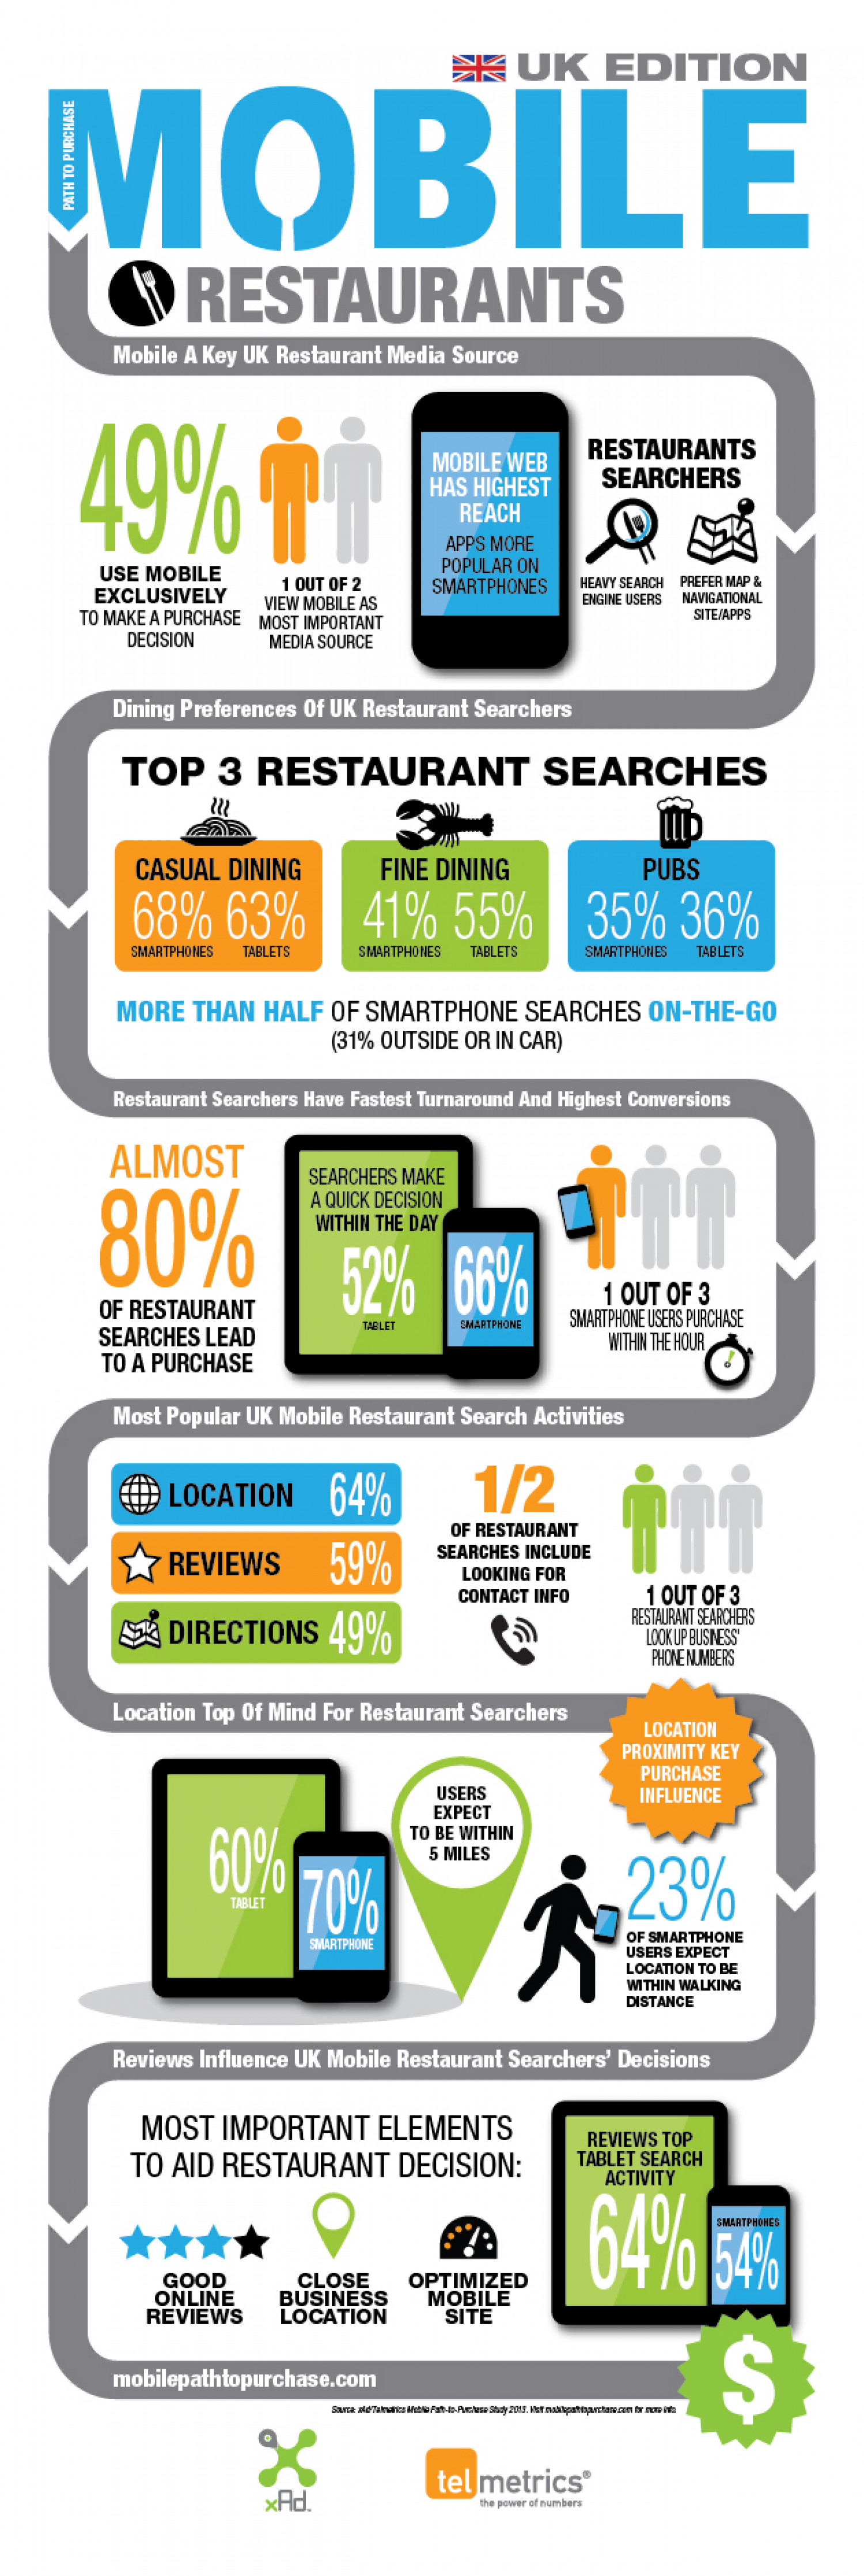 UK Restaurant Searches - Mobile Path-To-Purchase Infographic